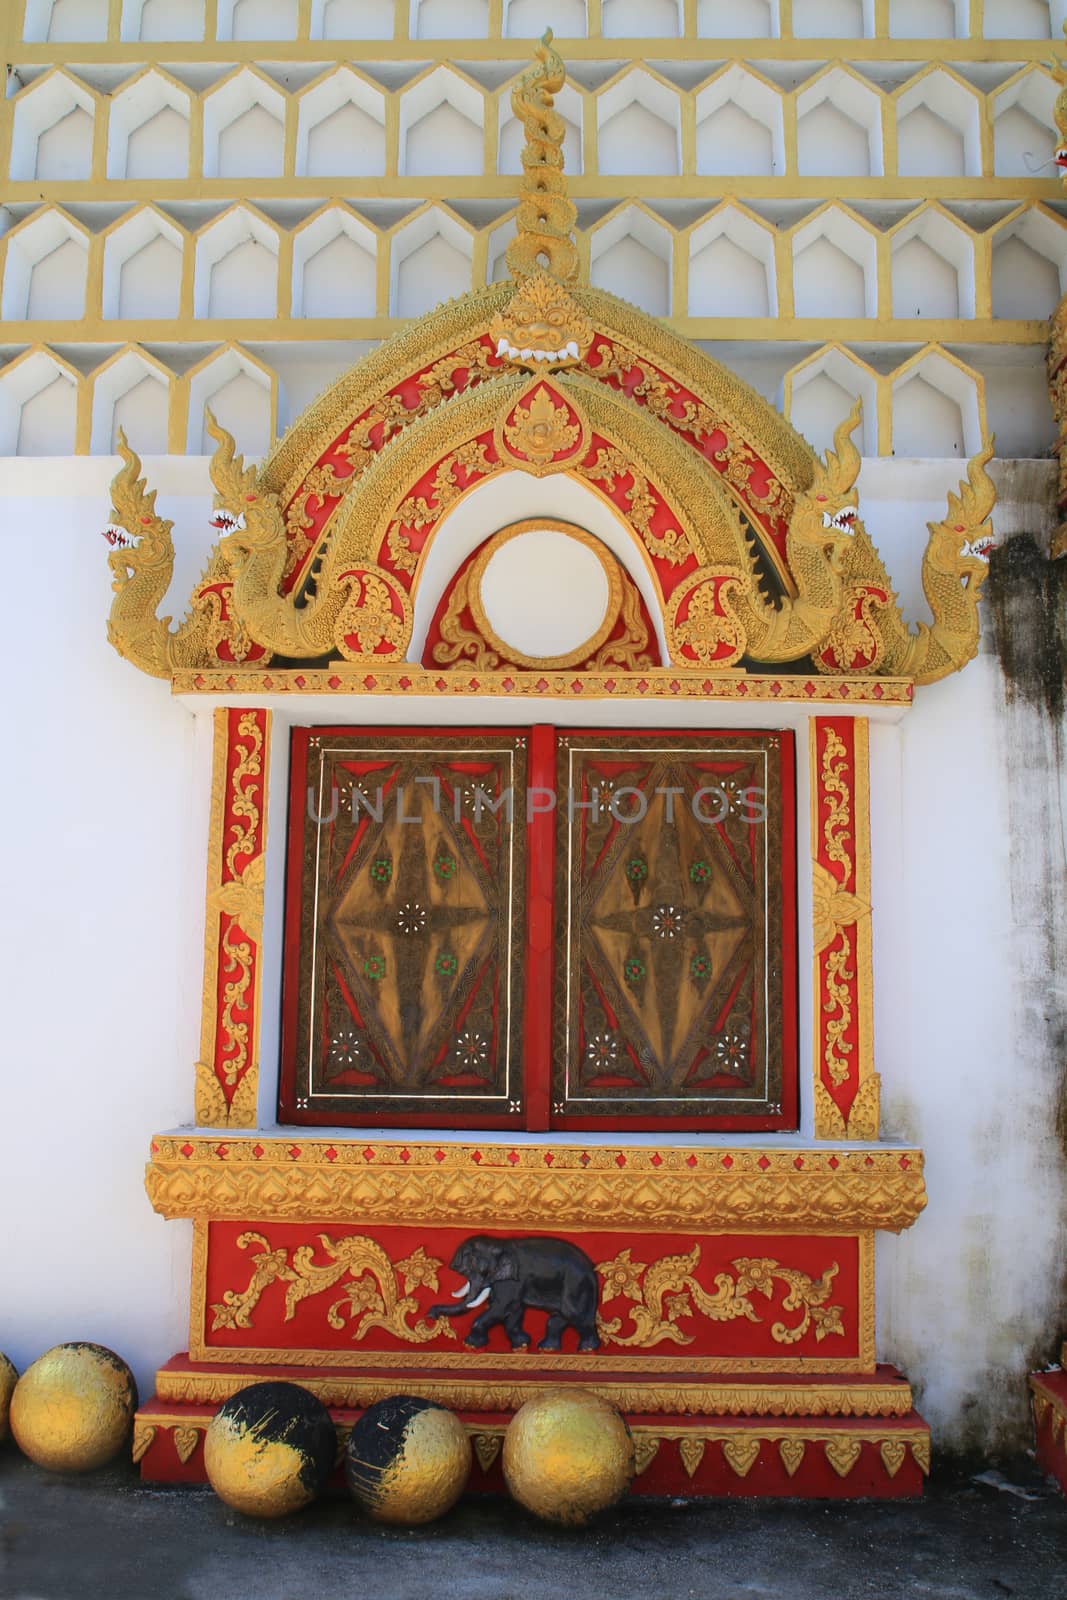 The window of the monastery decorated and design with Thai pattern in the public temple.